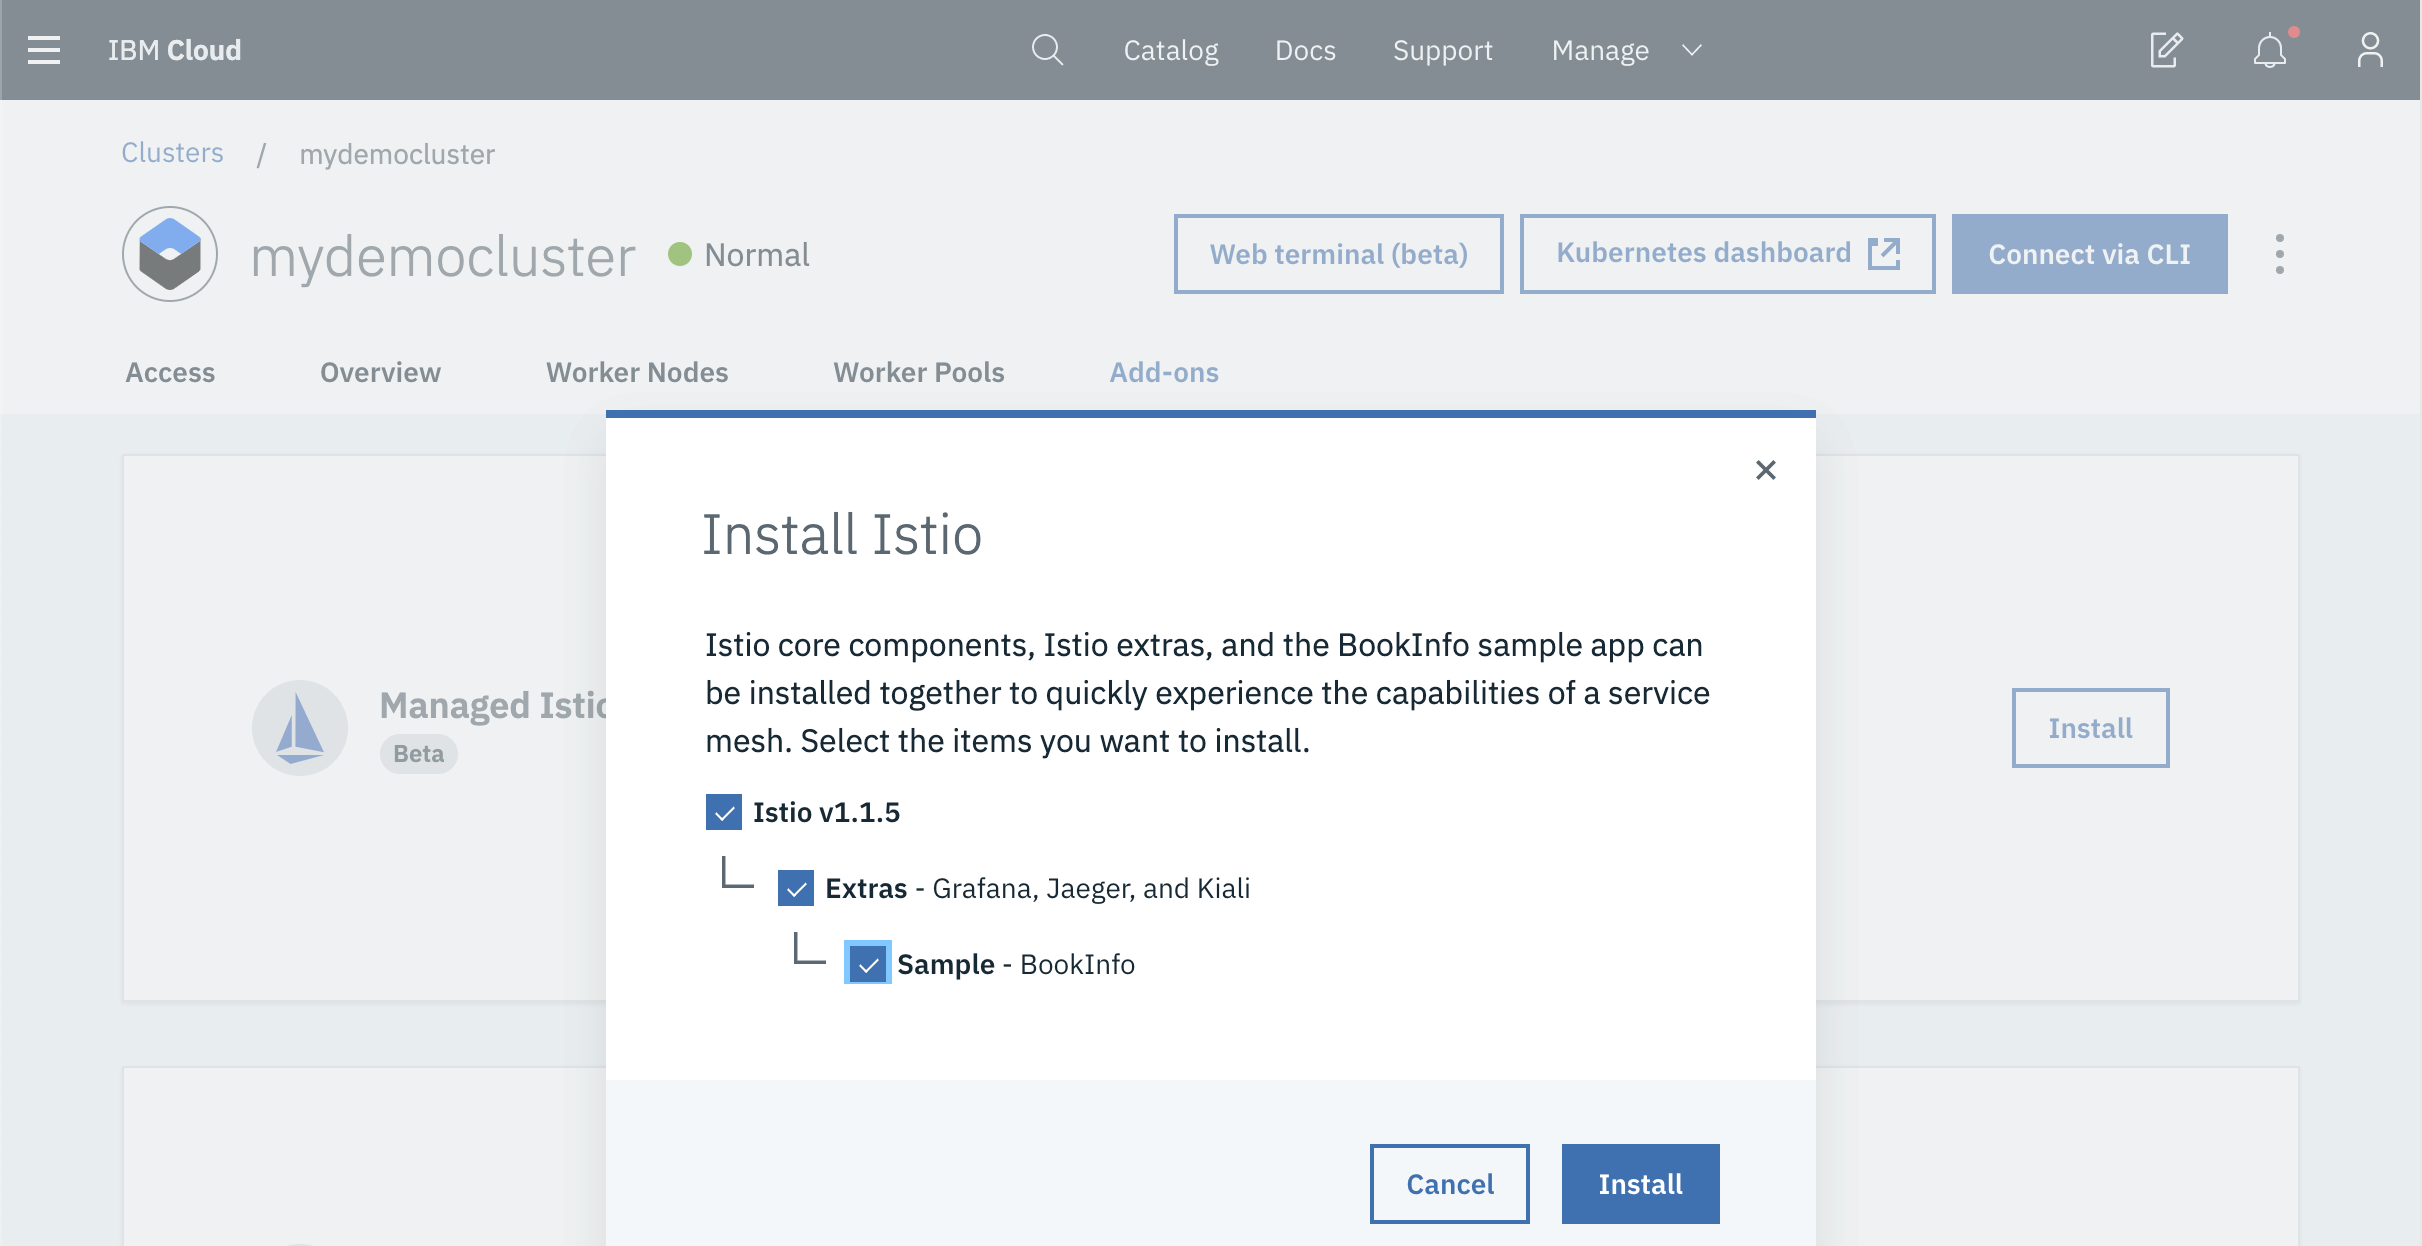 Enable managed Istio add-ons in the IBM Cloud console